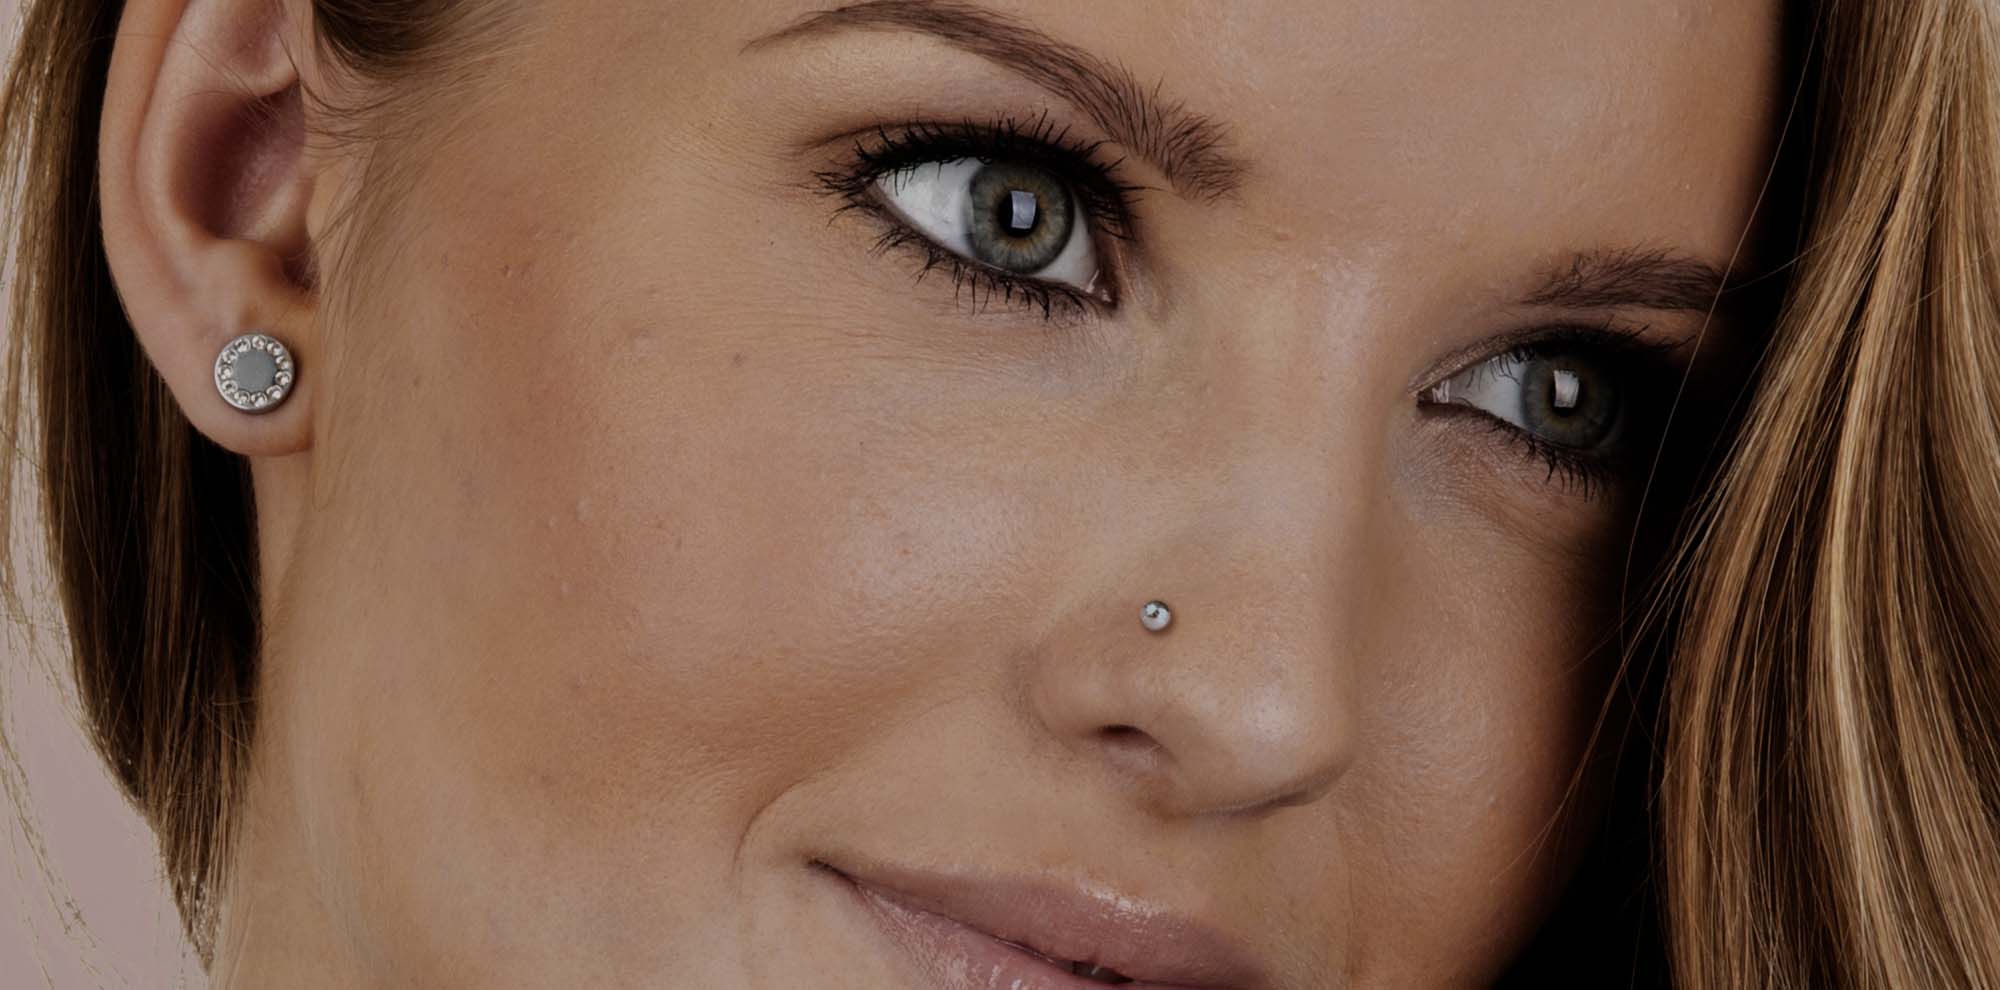 Aftercare instructions - nose piercing